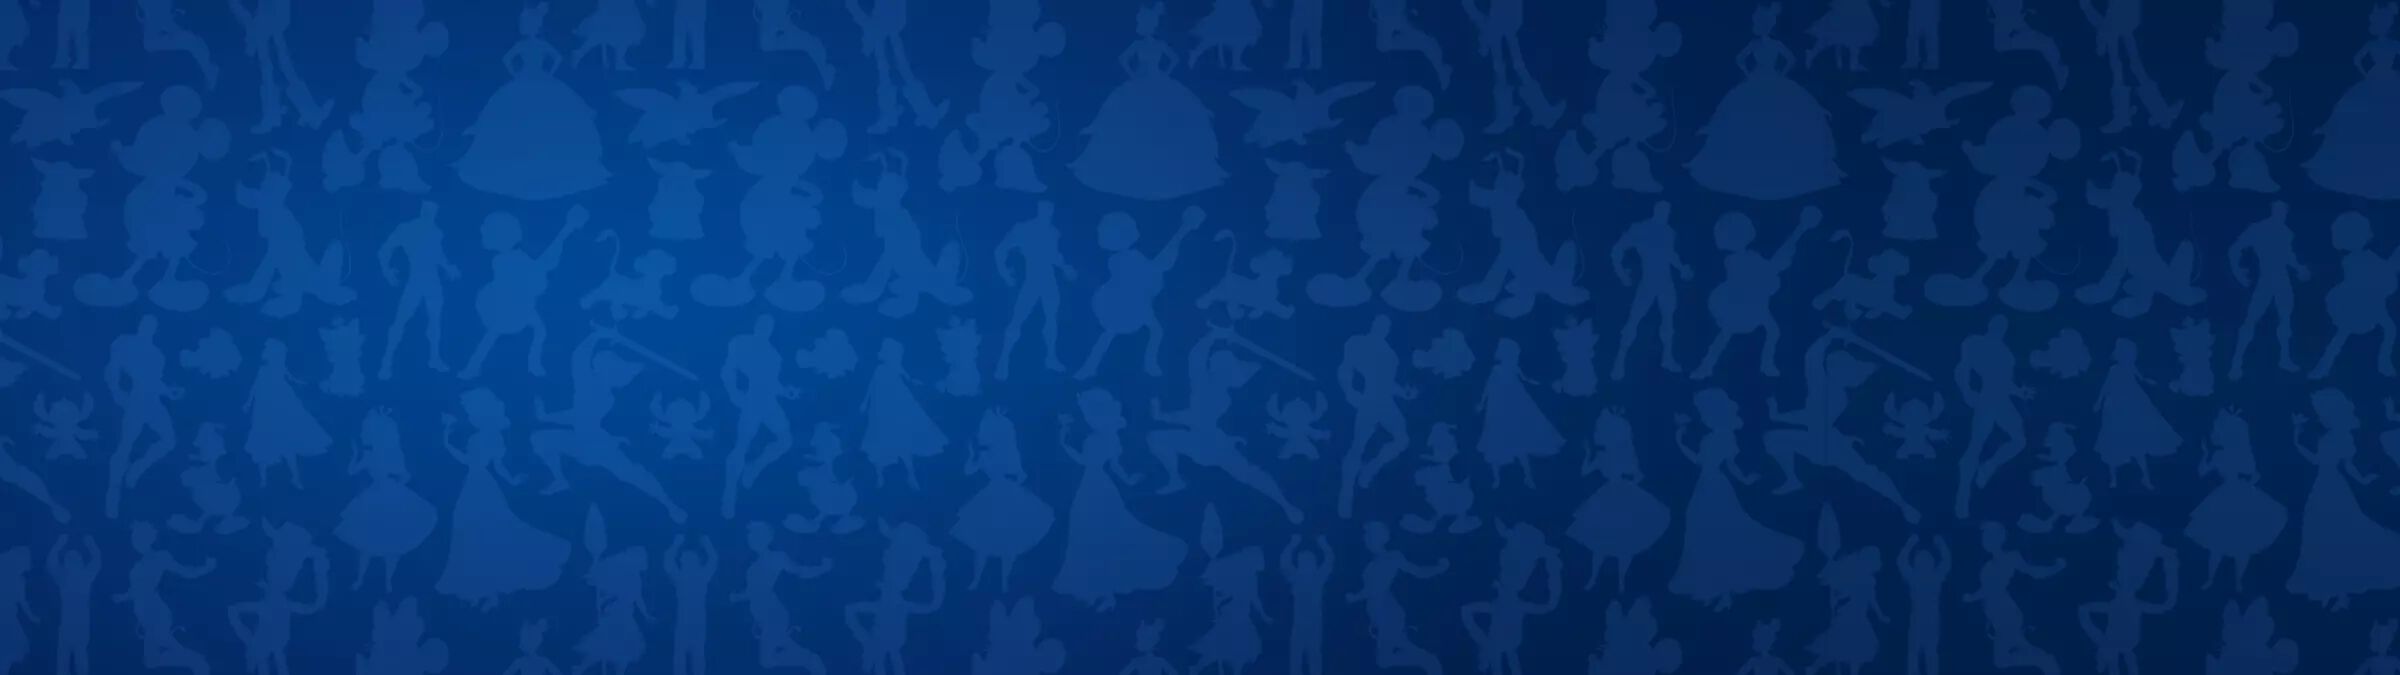 Blue background with silhouettes of Disney characters